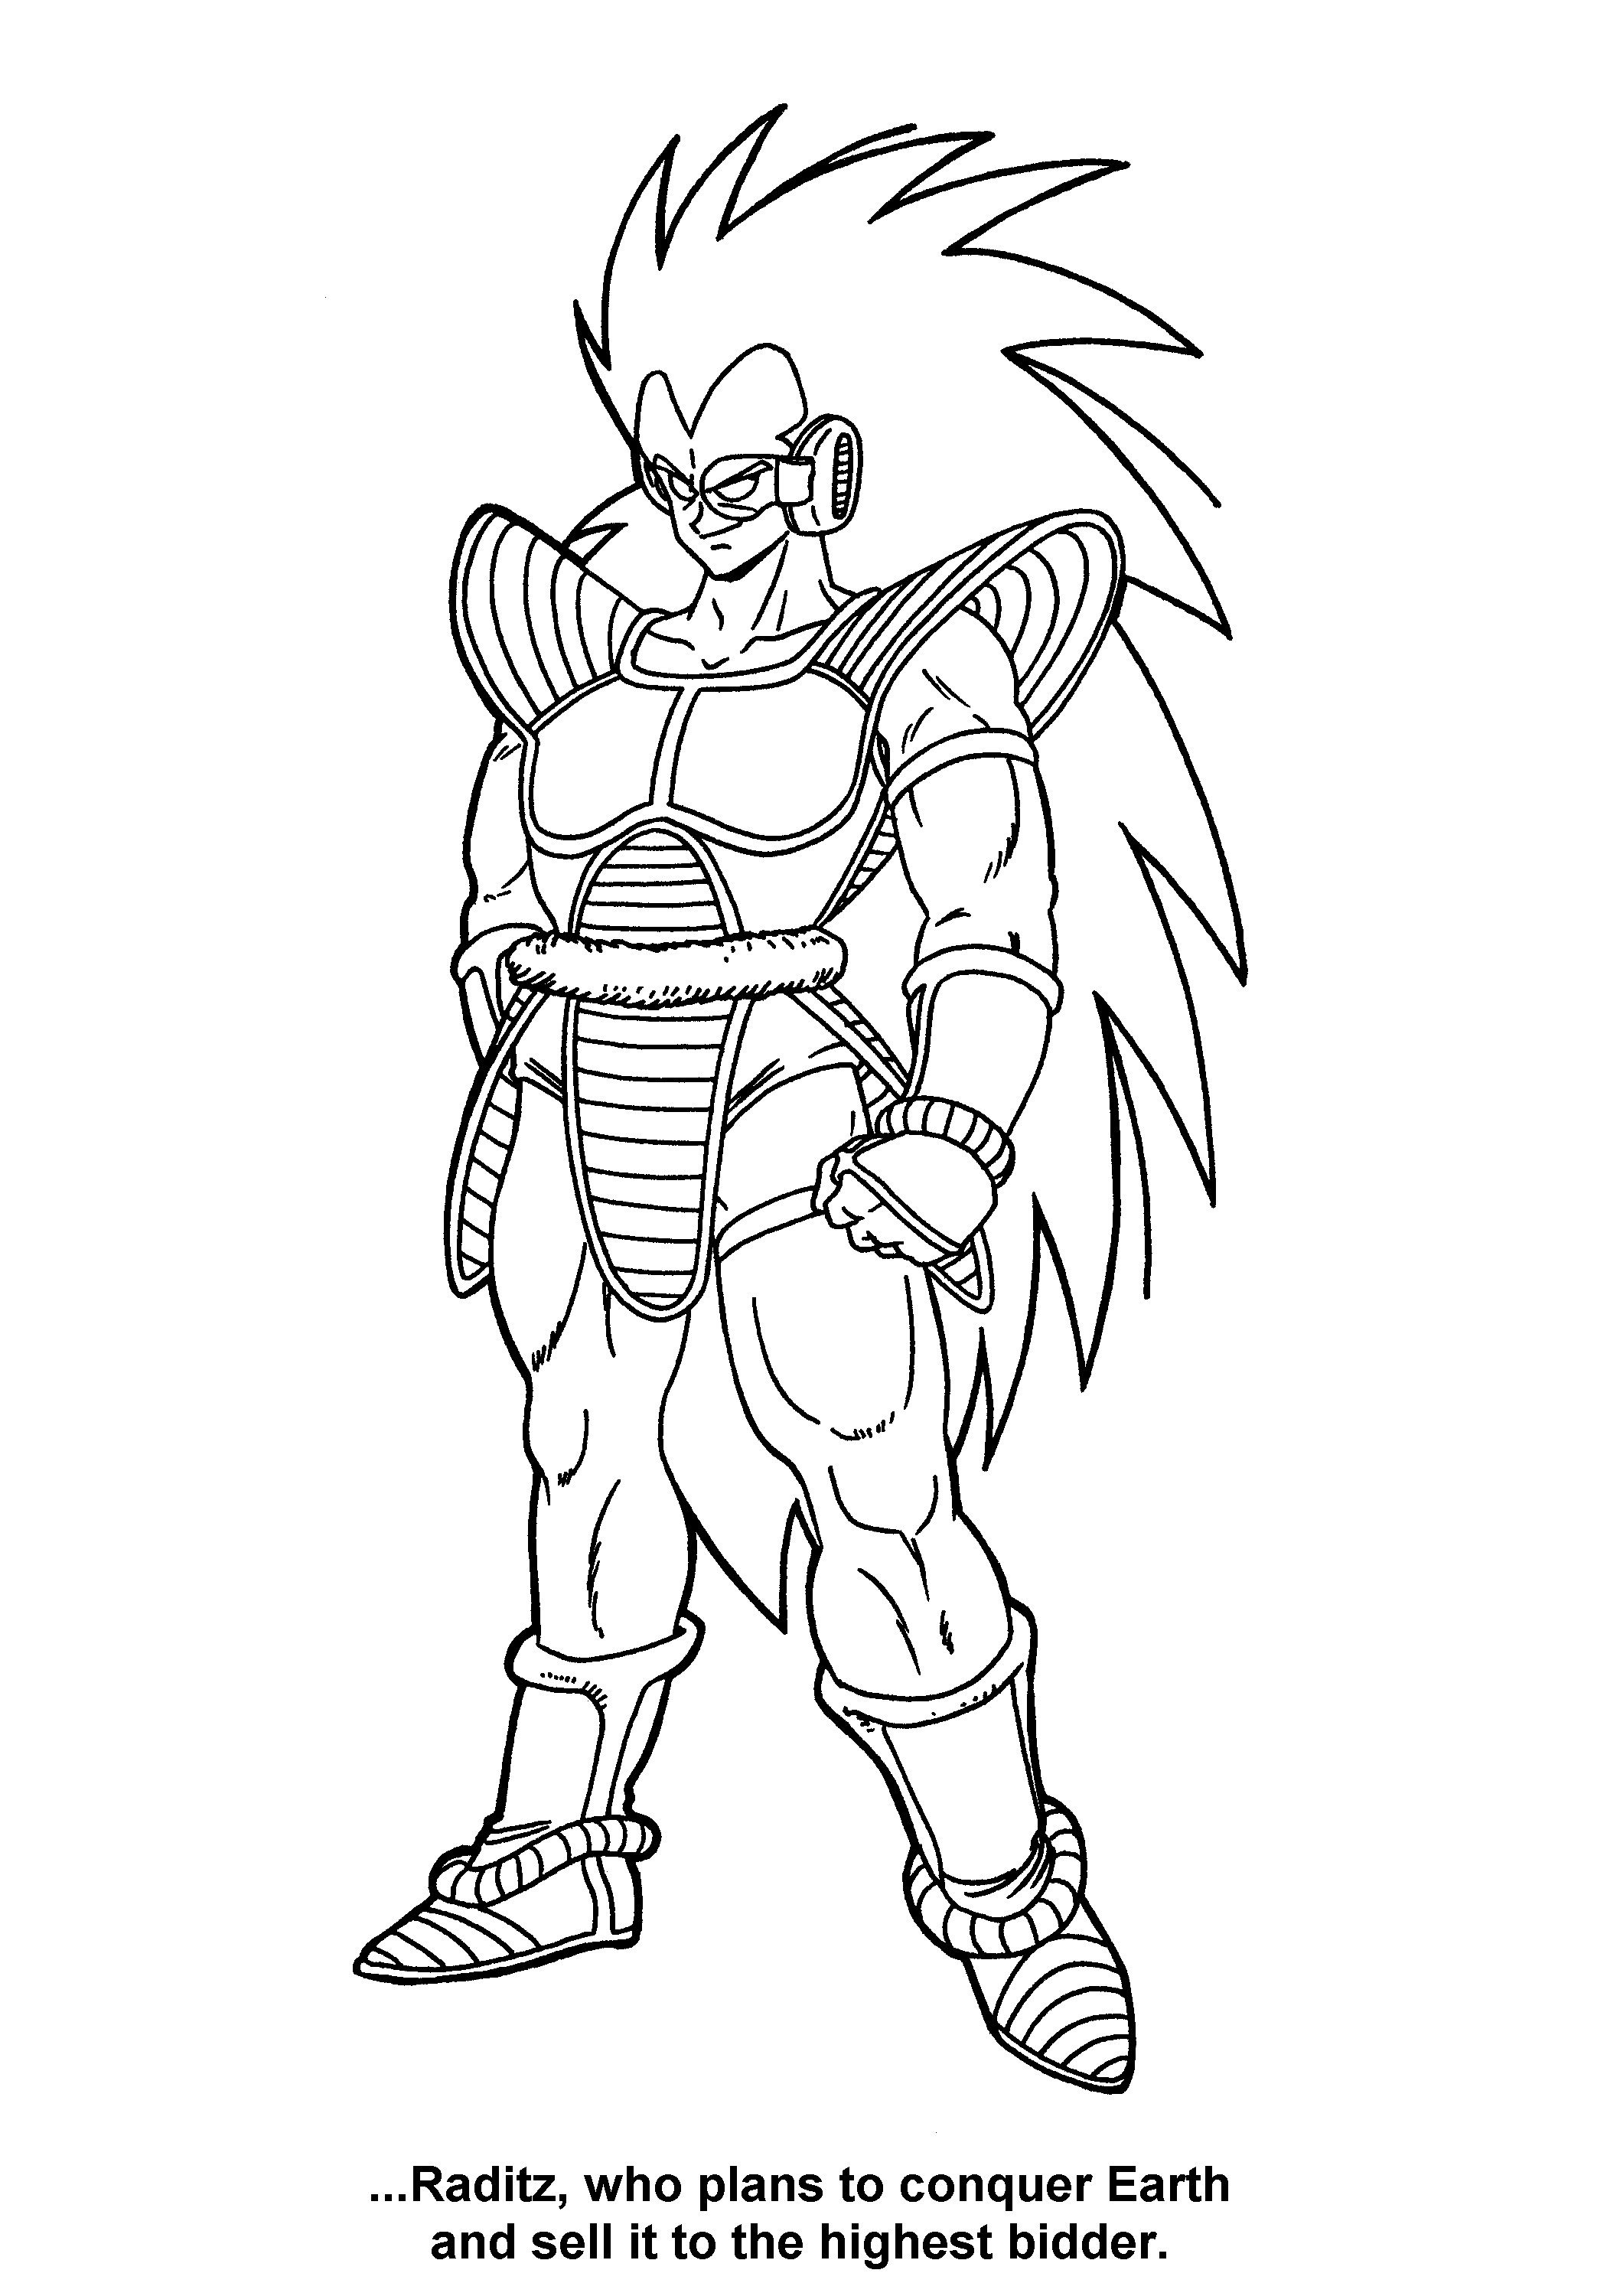 Dragonballz Coloring Pages
 Dragon ball z Coloring Pages